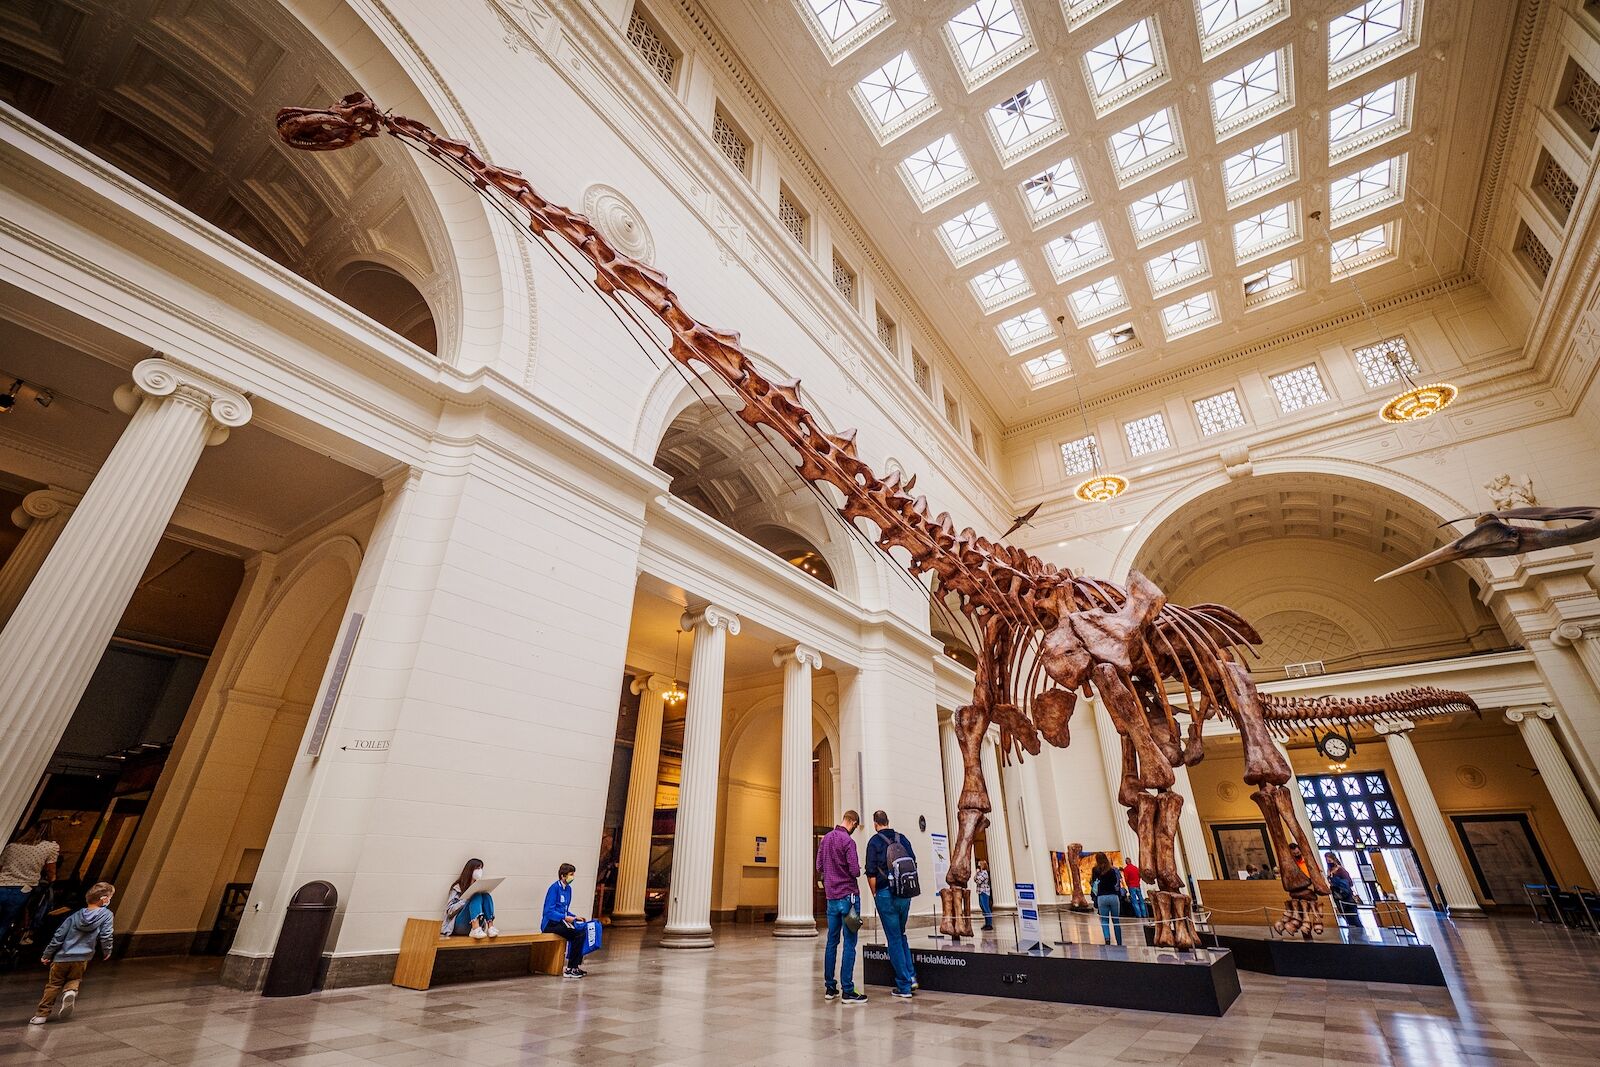 Dinosaur skeleton visible at the Field Museum. The Field Museum is one of the best museums in Chicago